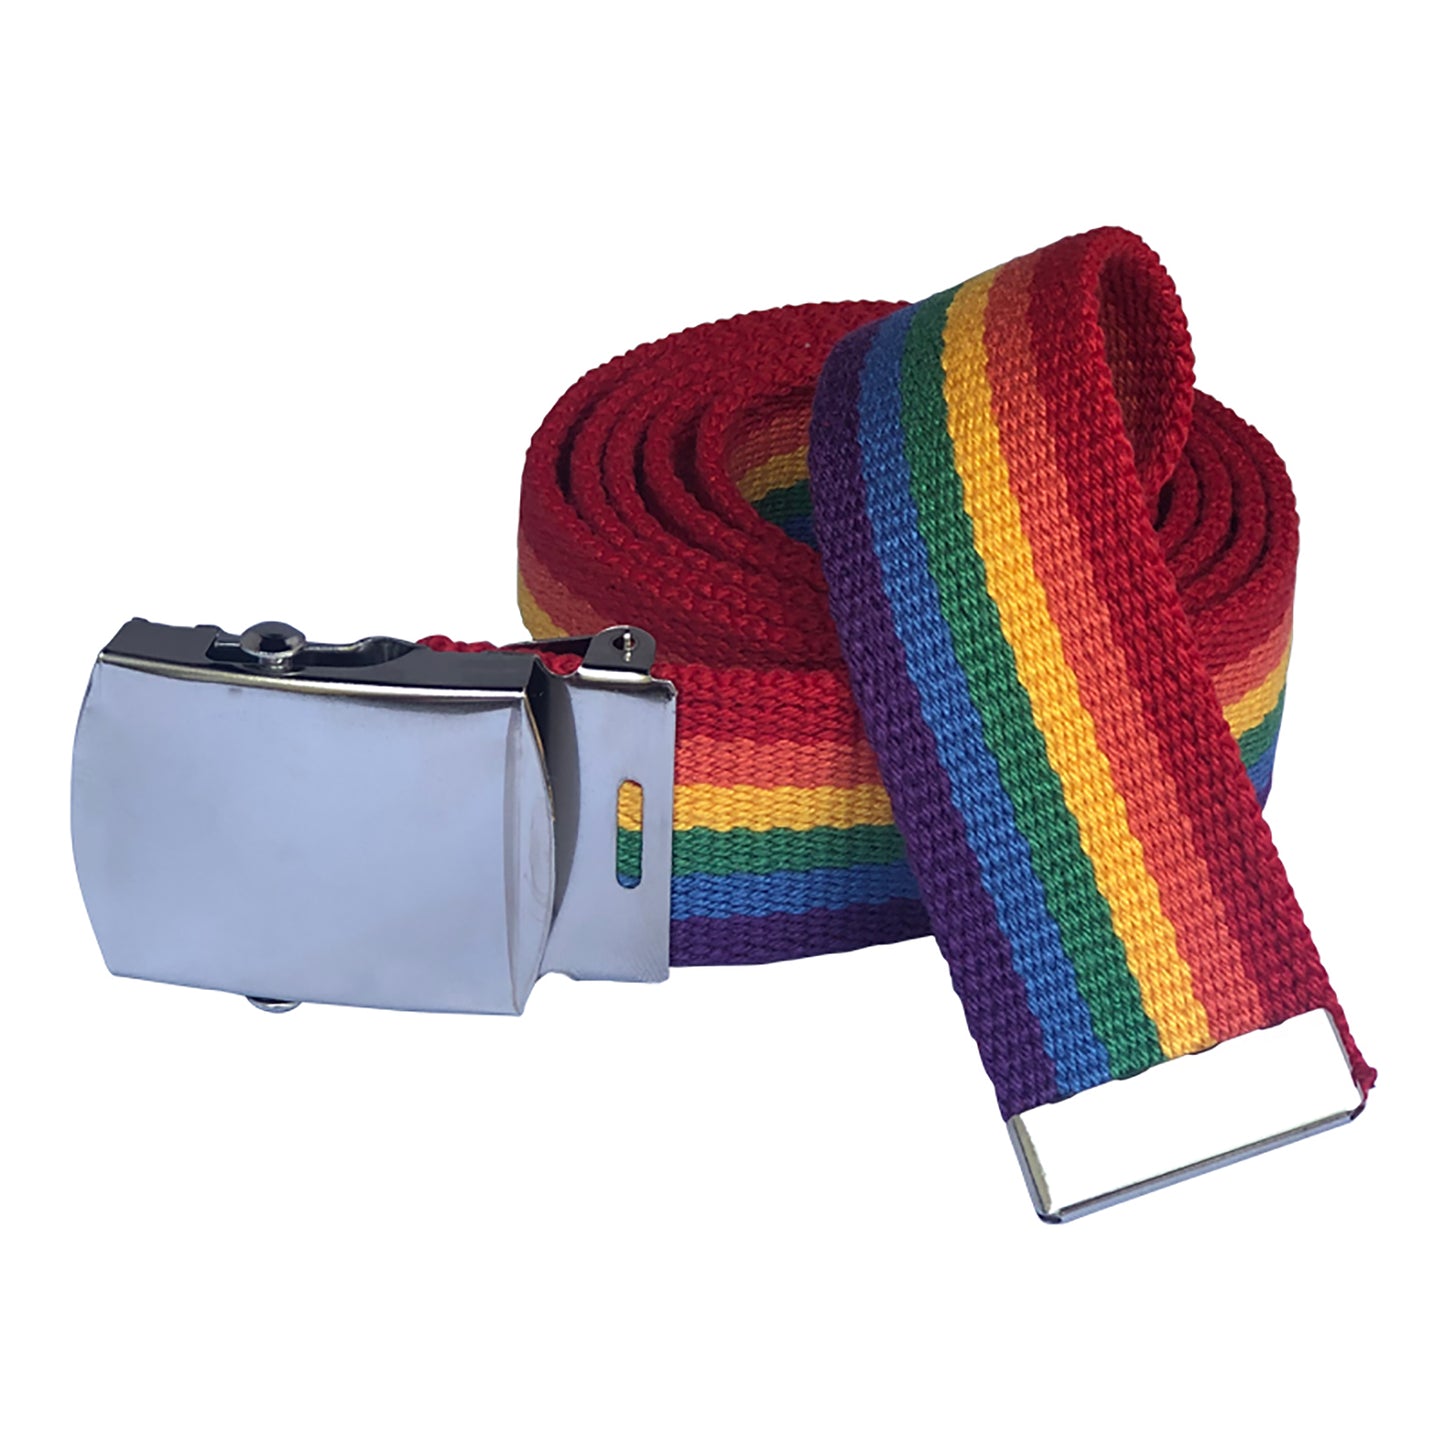 Rainbow Striped Web Belt with Silver Buckle- 4 Colors!